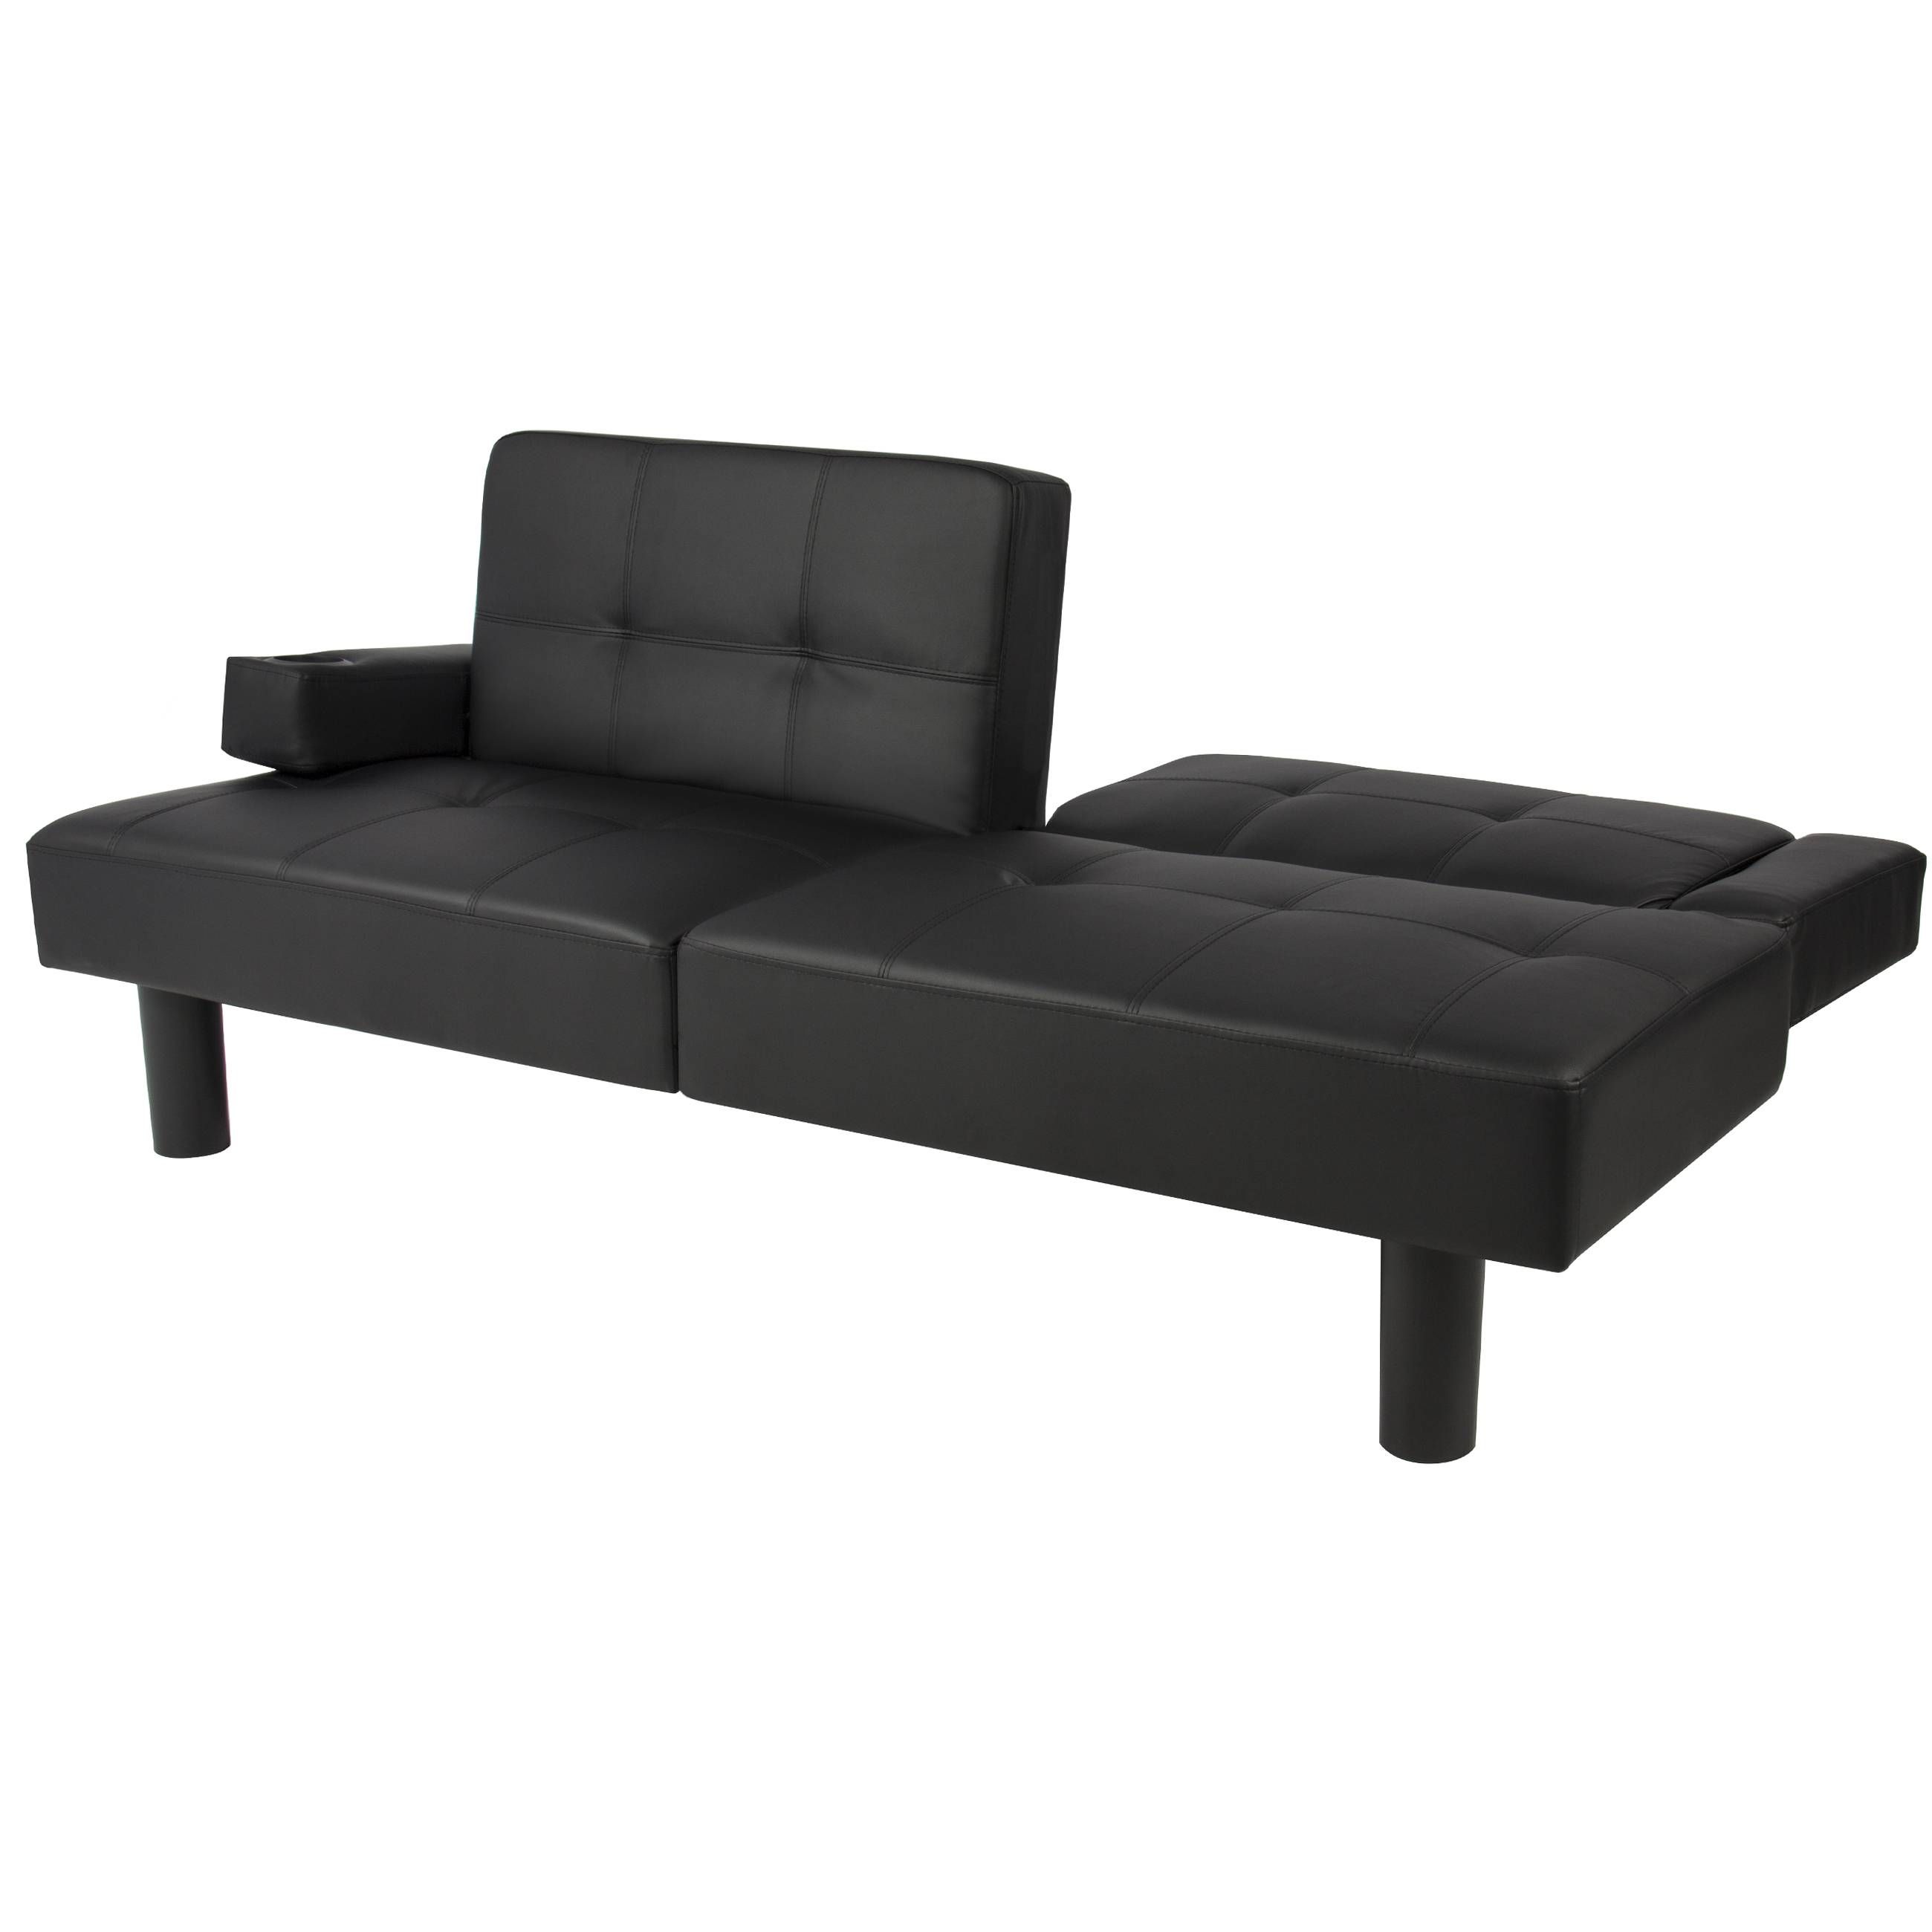 Leather Faux Fold Down Futon Sofa Bed Couch Sleeper Furniture With Convertible Futon Sofa Beds (View 8 of 15)